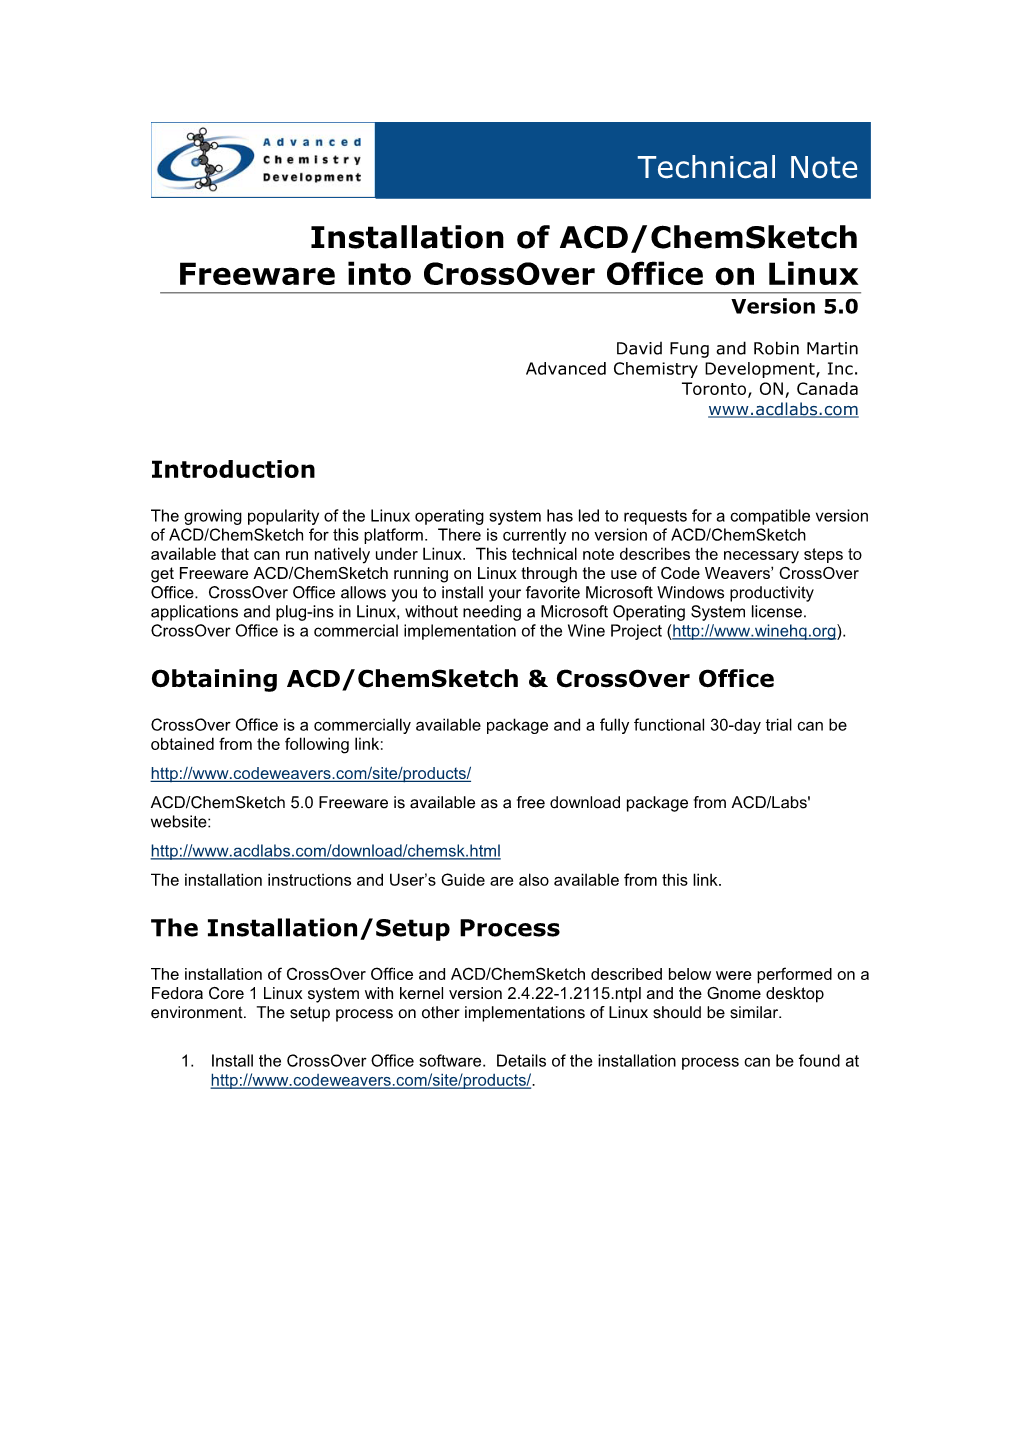 Technical Note Installation of ACD/Chemsketch Freeware Into